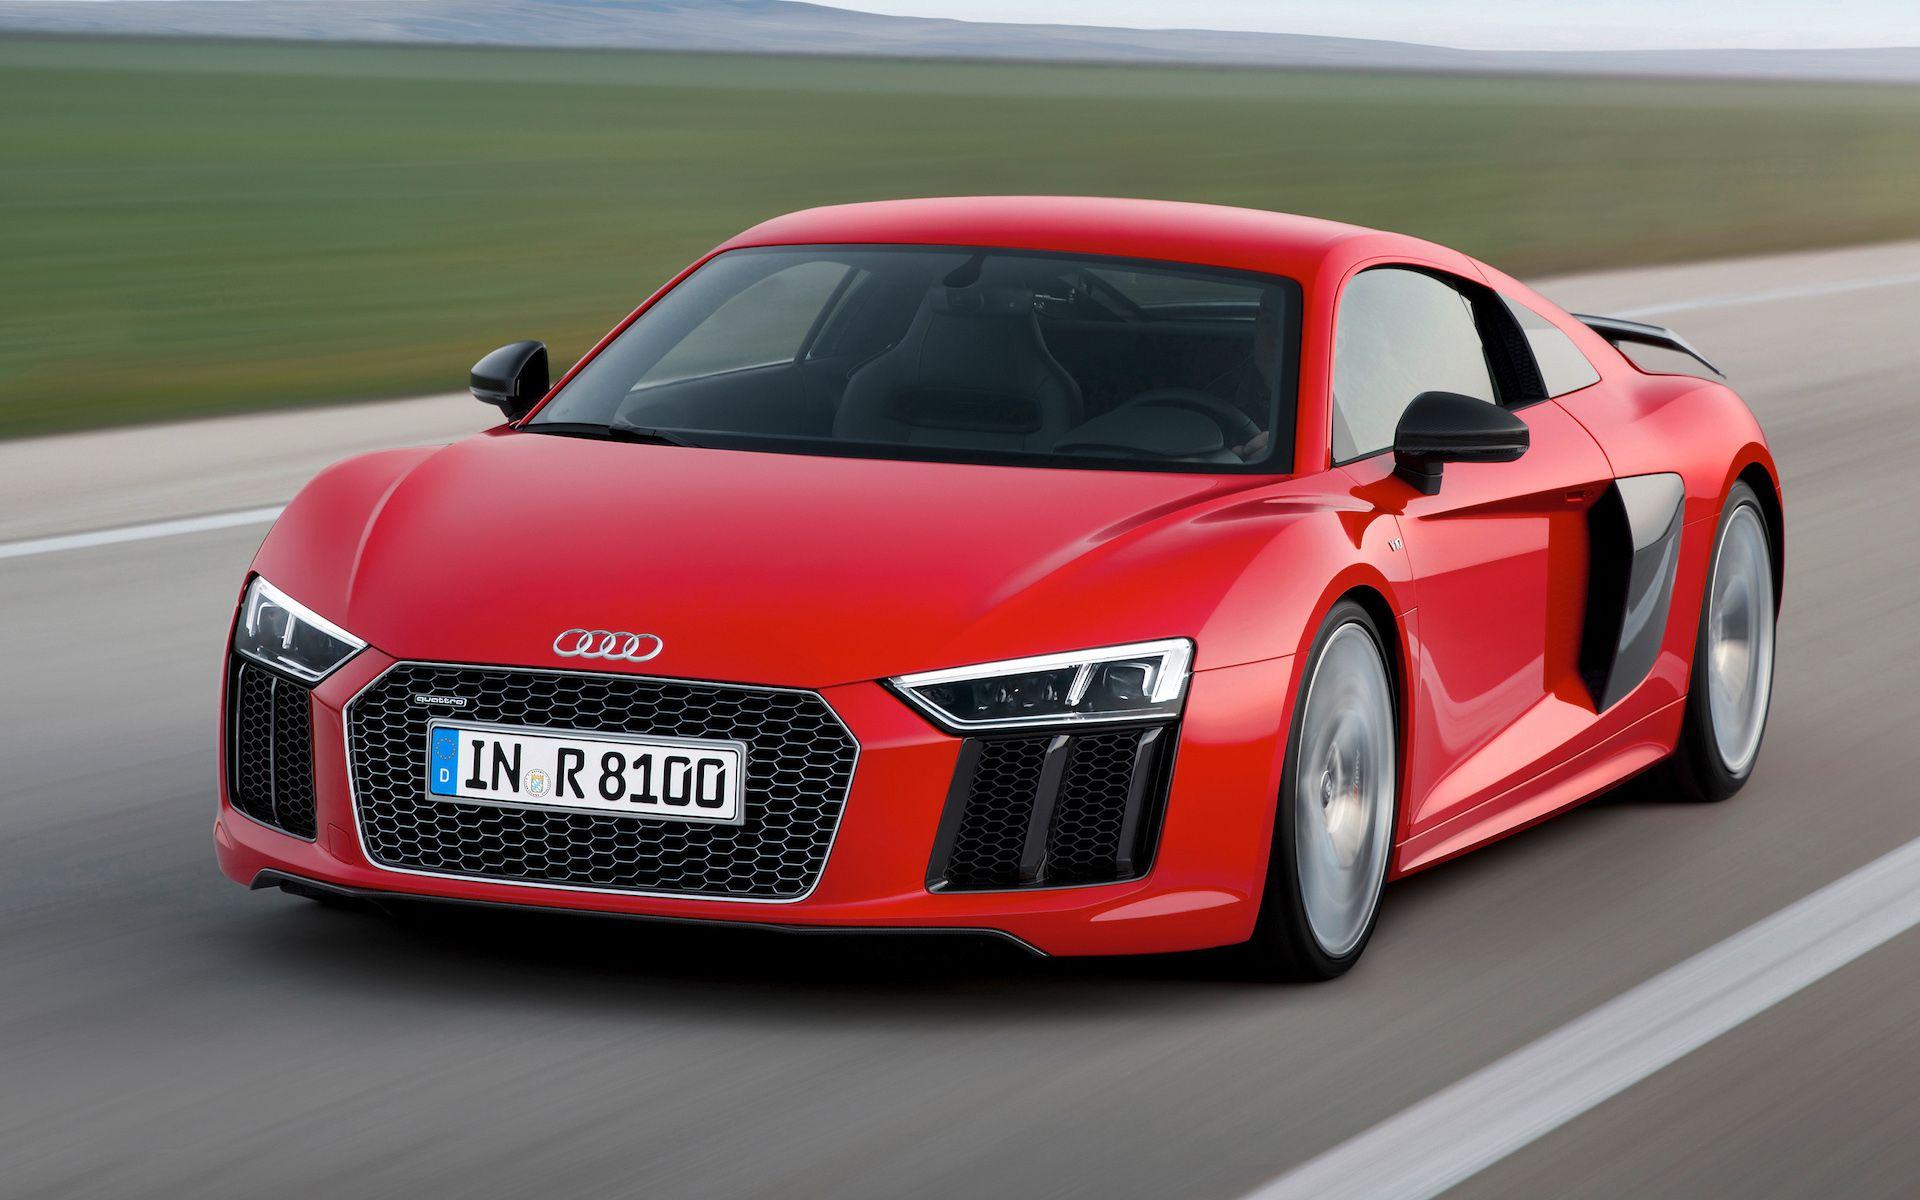 2016 Audi R8 Wallpapers Top Free 2016 Audi R8 Backgrounds Wallpaperaccess